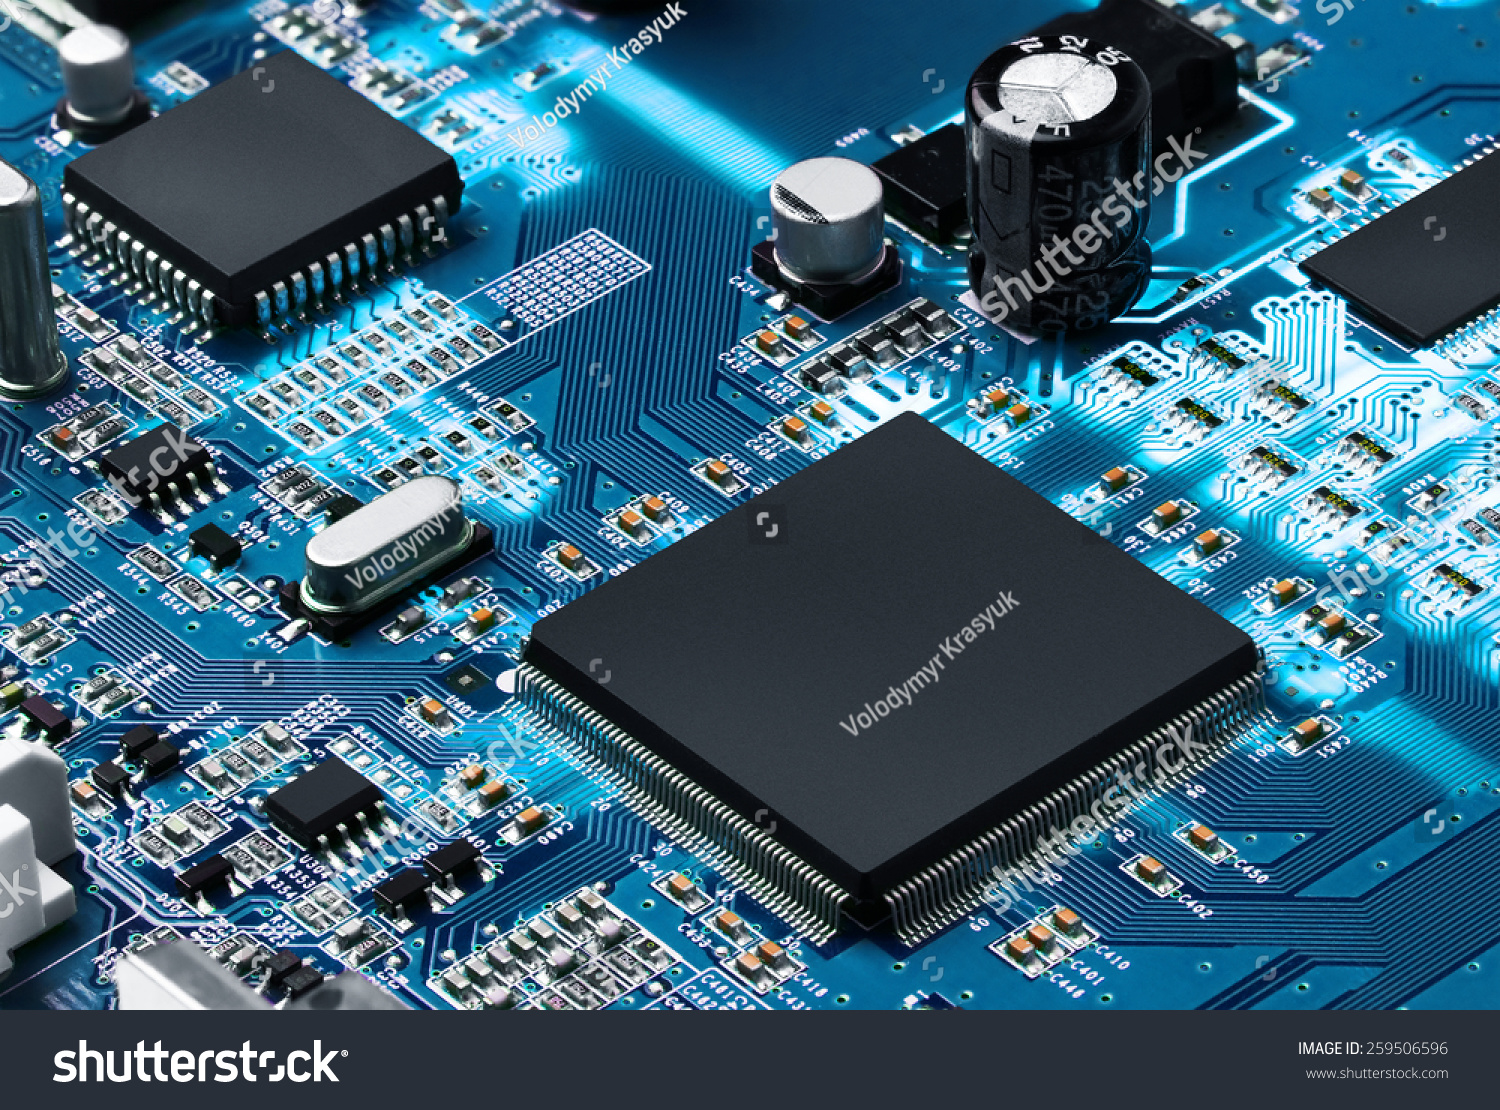 Electronic circuit board with processor, close up. #259506596